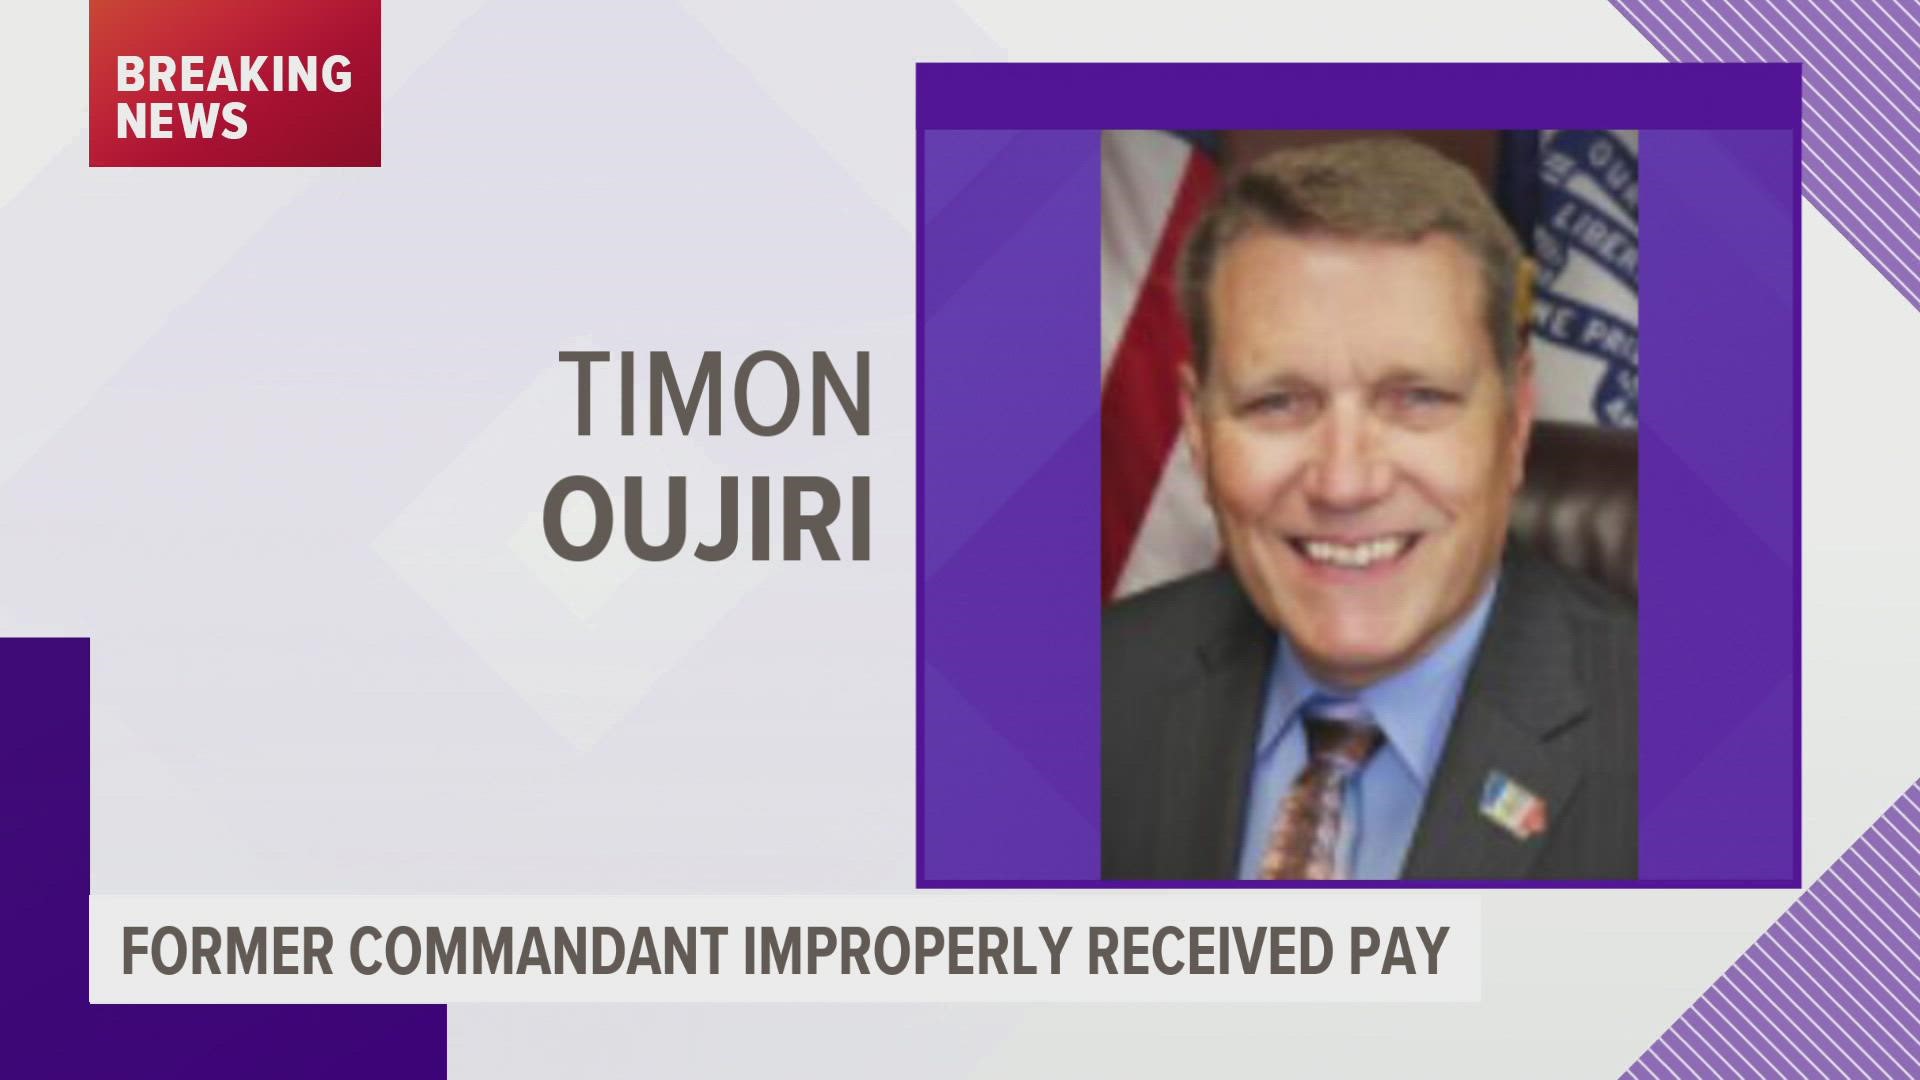 The state auditor's report says $105,412.85 of improper disbursements were made, including just over $90,000 paid to Timon Oujiri.